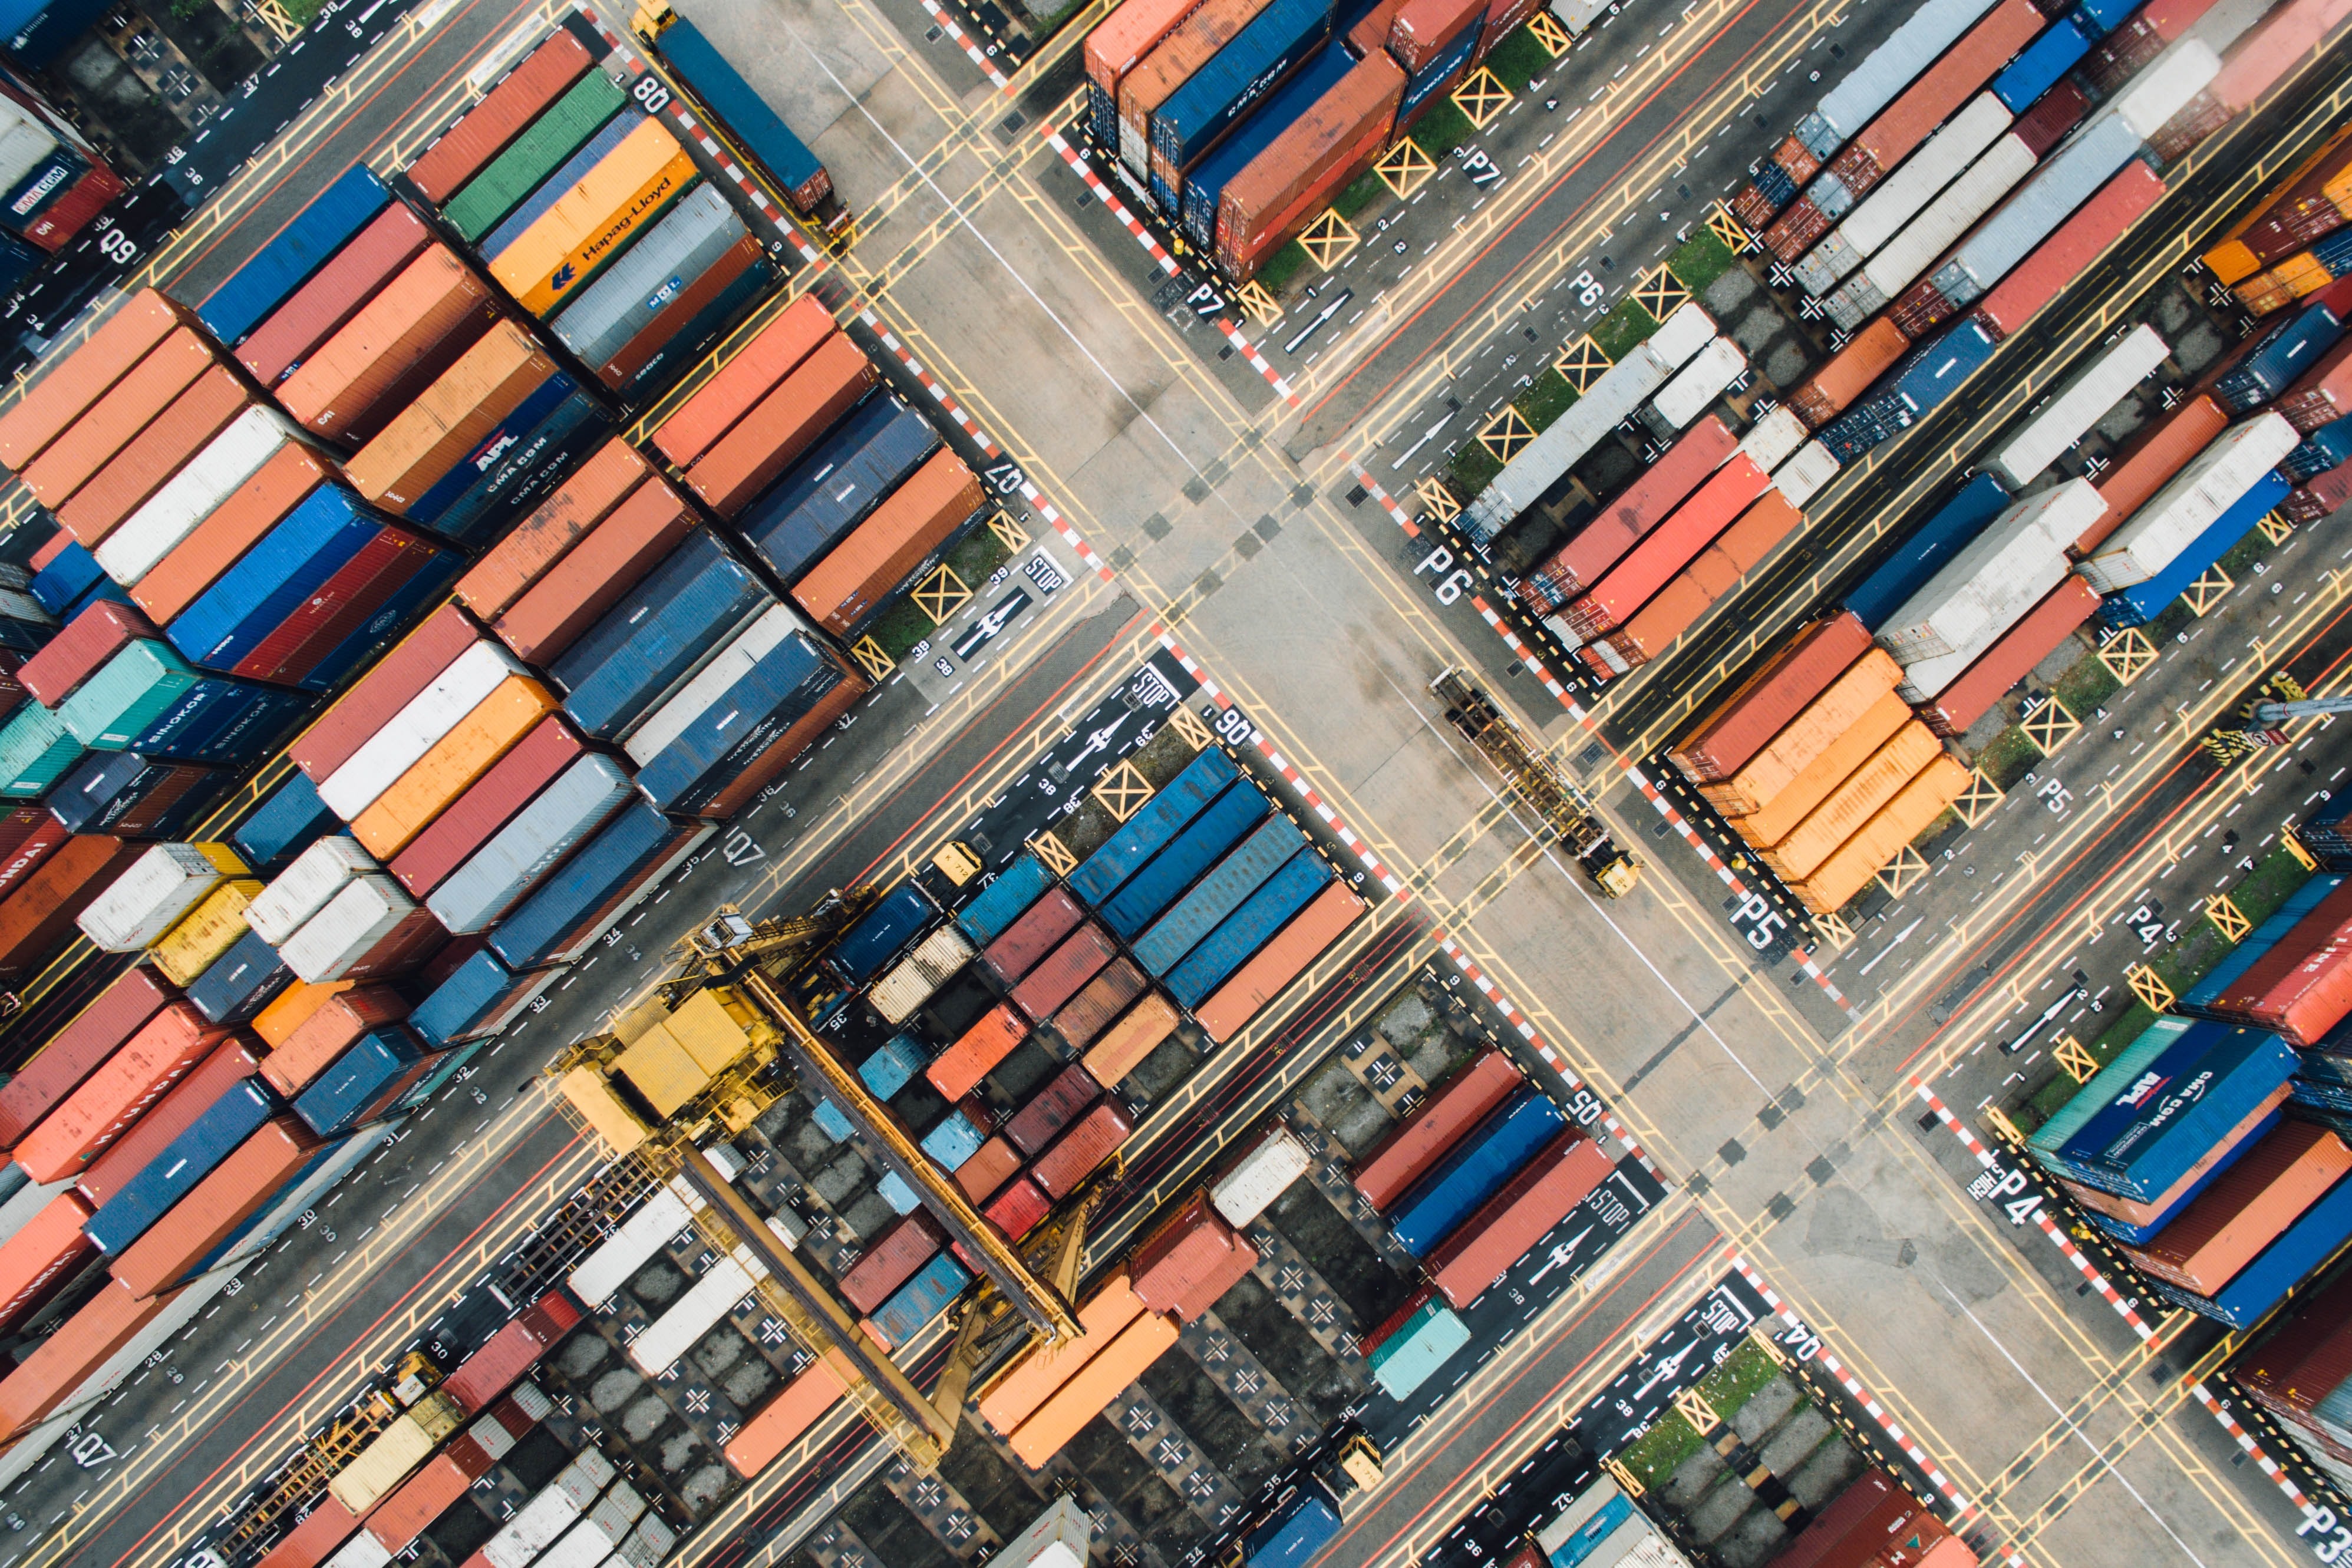 Birds eye view of shipping containers